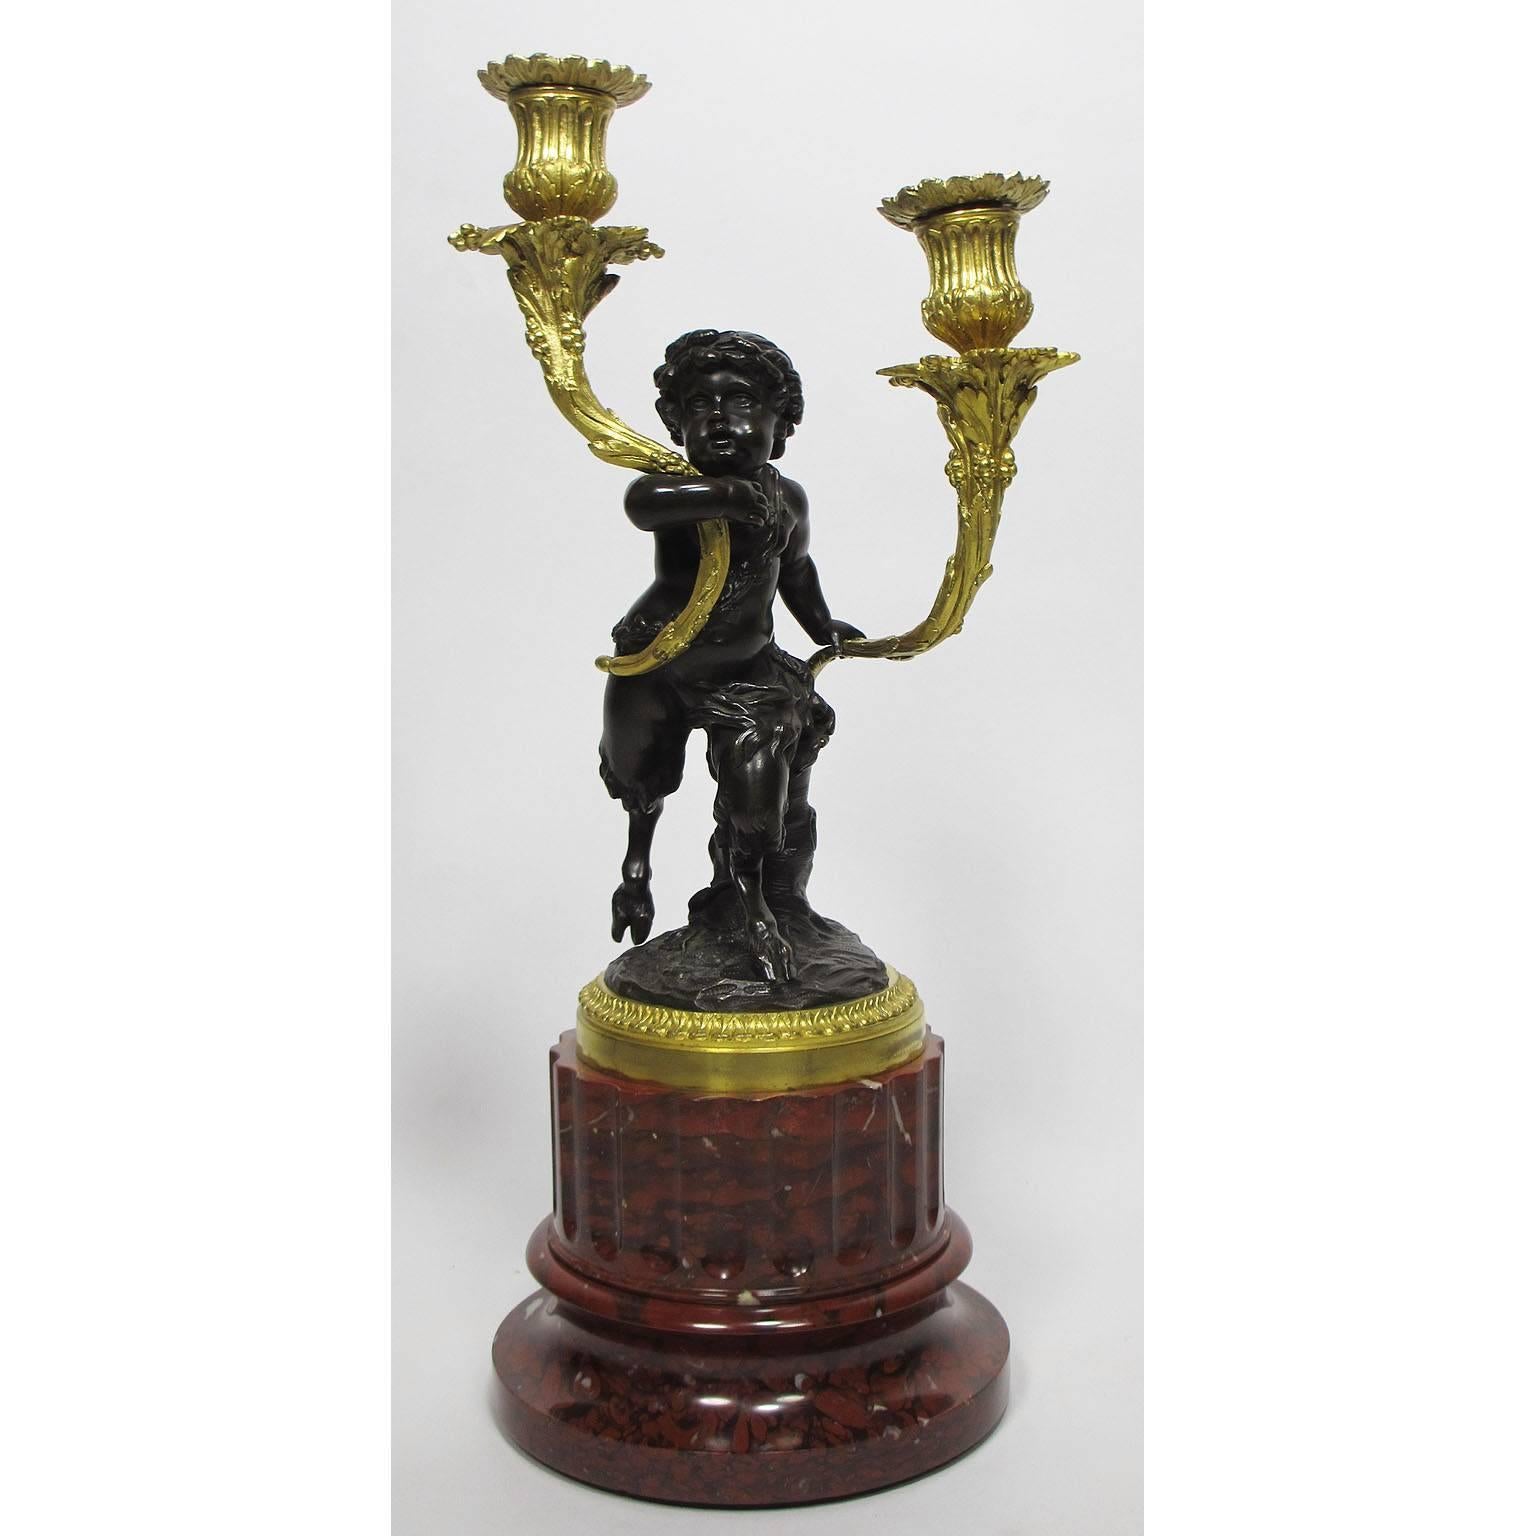 A very fine pair of French 19th century Louis XVI style patinated and gilt bronze figural two-light candelabra after a model by Claude-Michel Clodion (French, 1738-1814), one modeled as a child faun, the other as a putto, each holding a gilt bronze